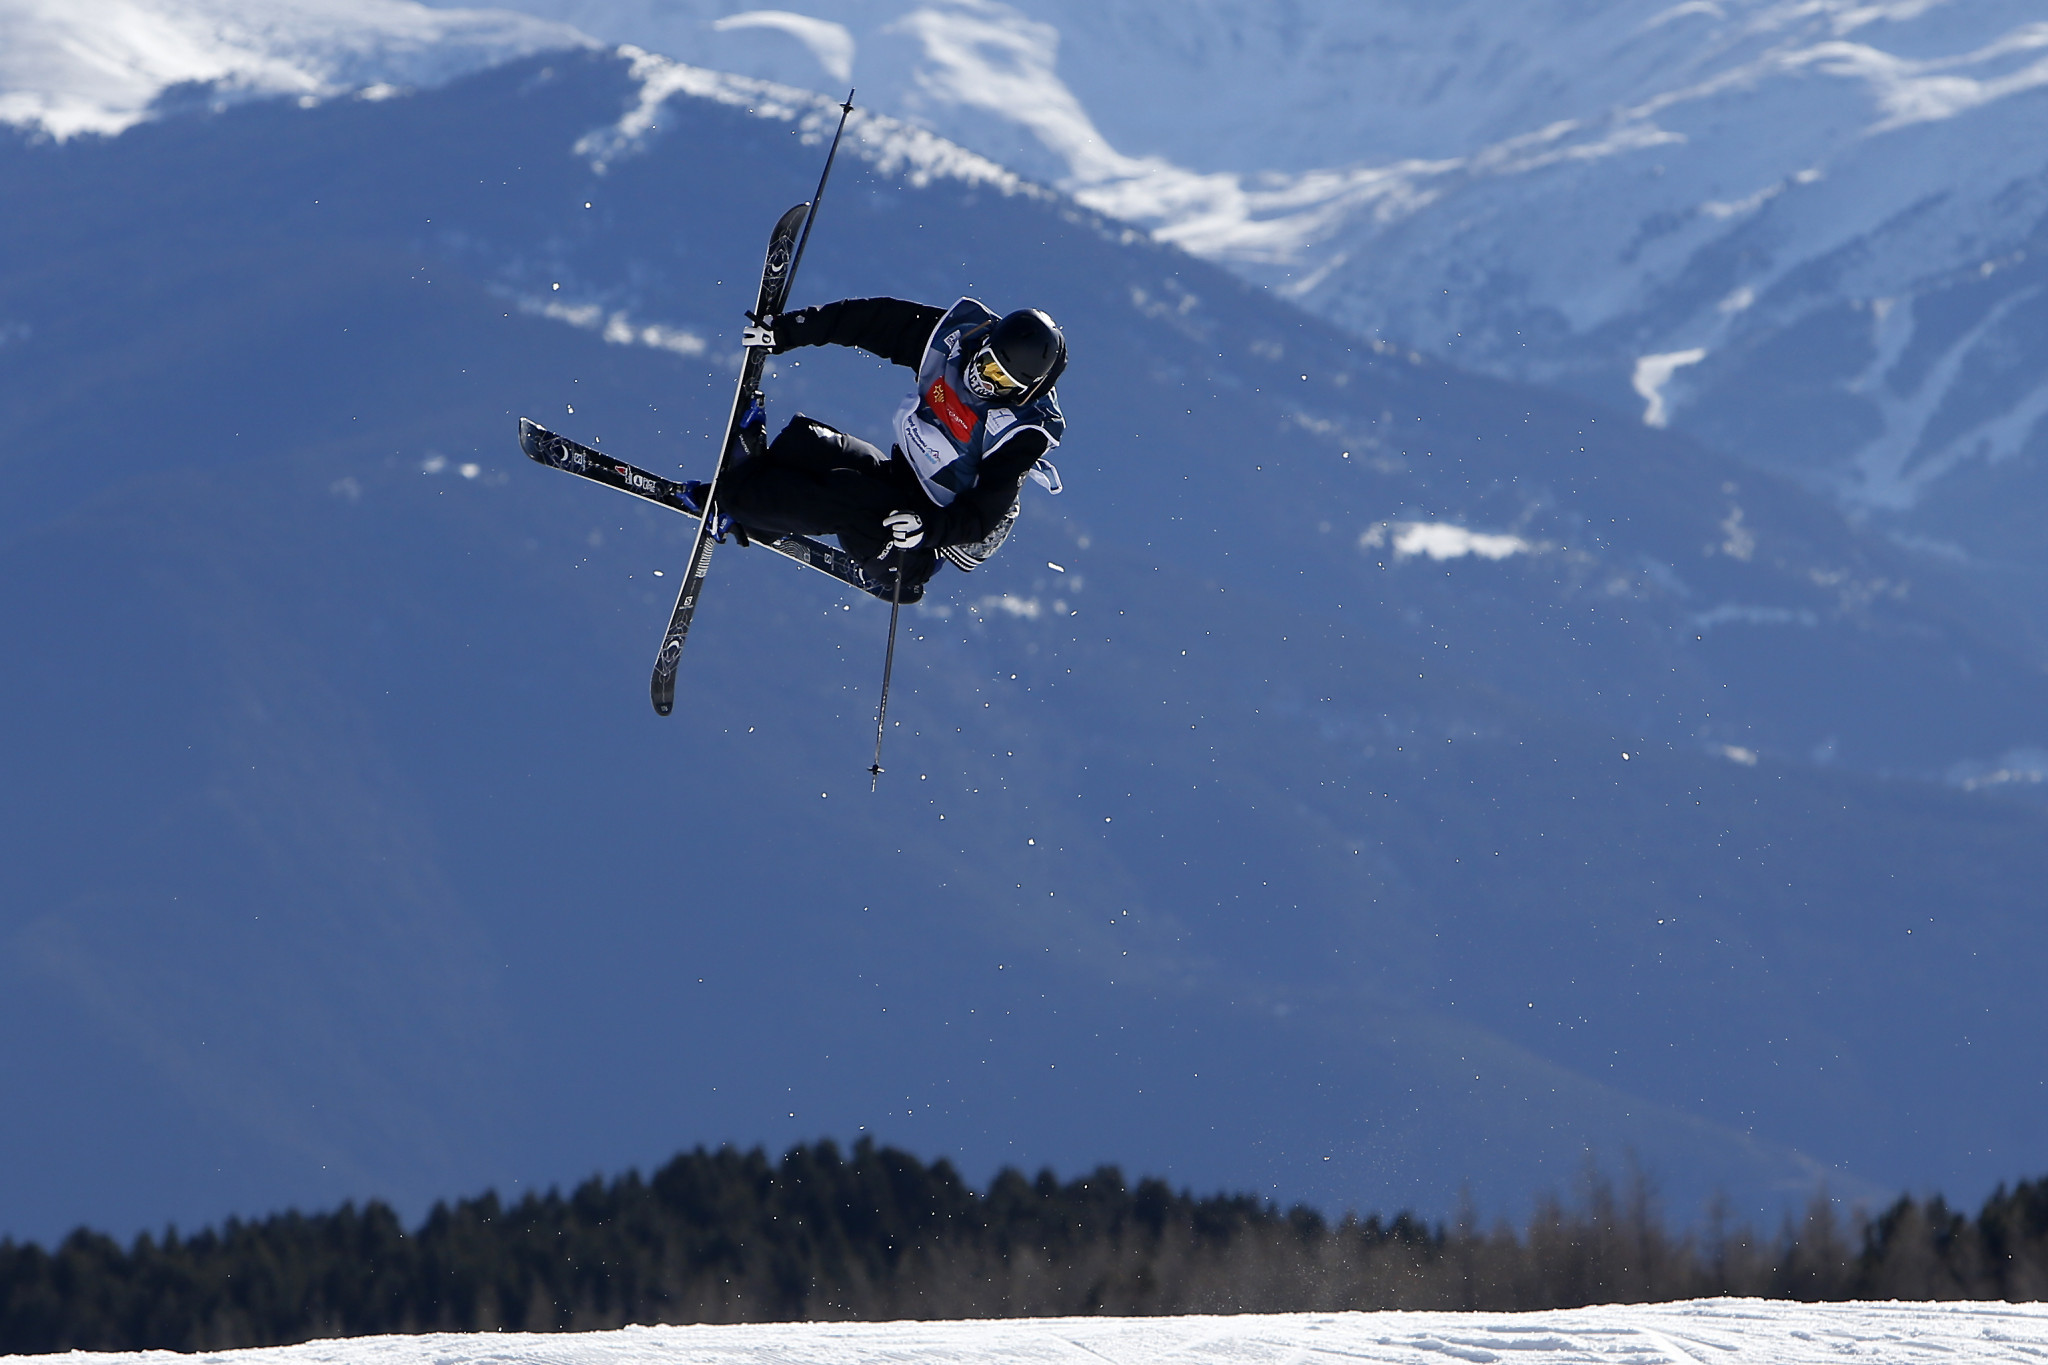 Bakuriani is preparing to host the 2023 FIS Freestyle Ski, Snowboard and Freeski World Championships for the first time ©Getty Images